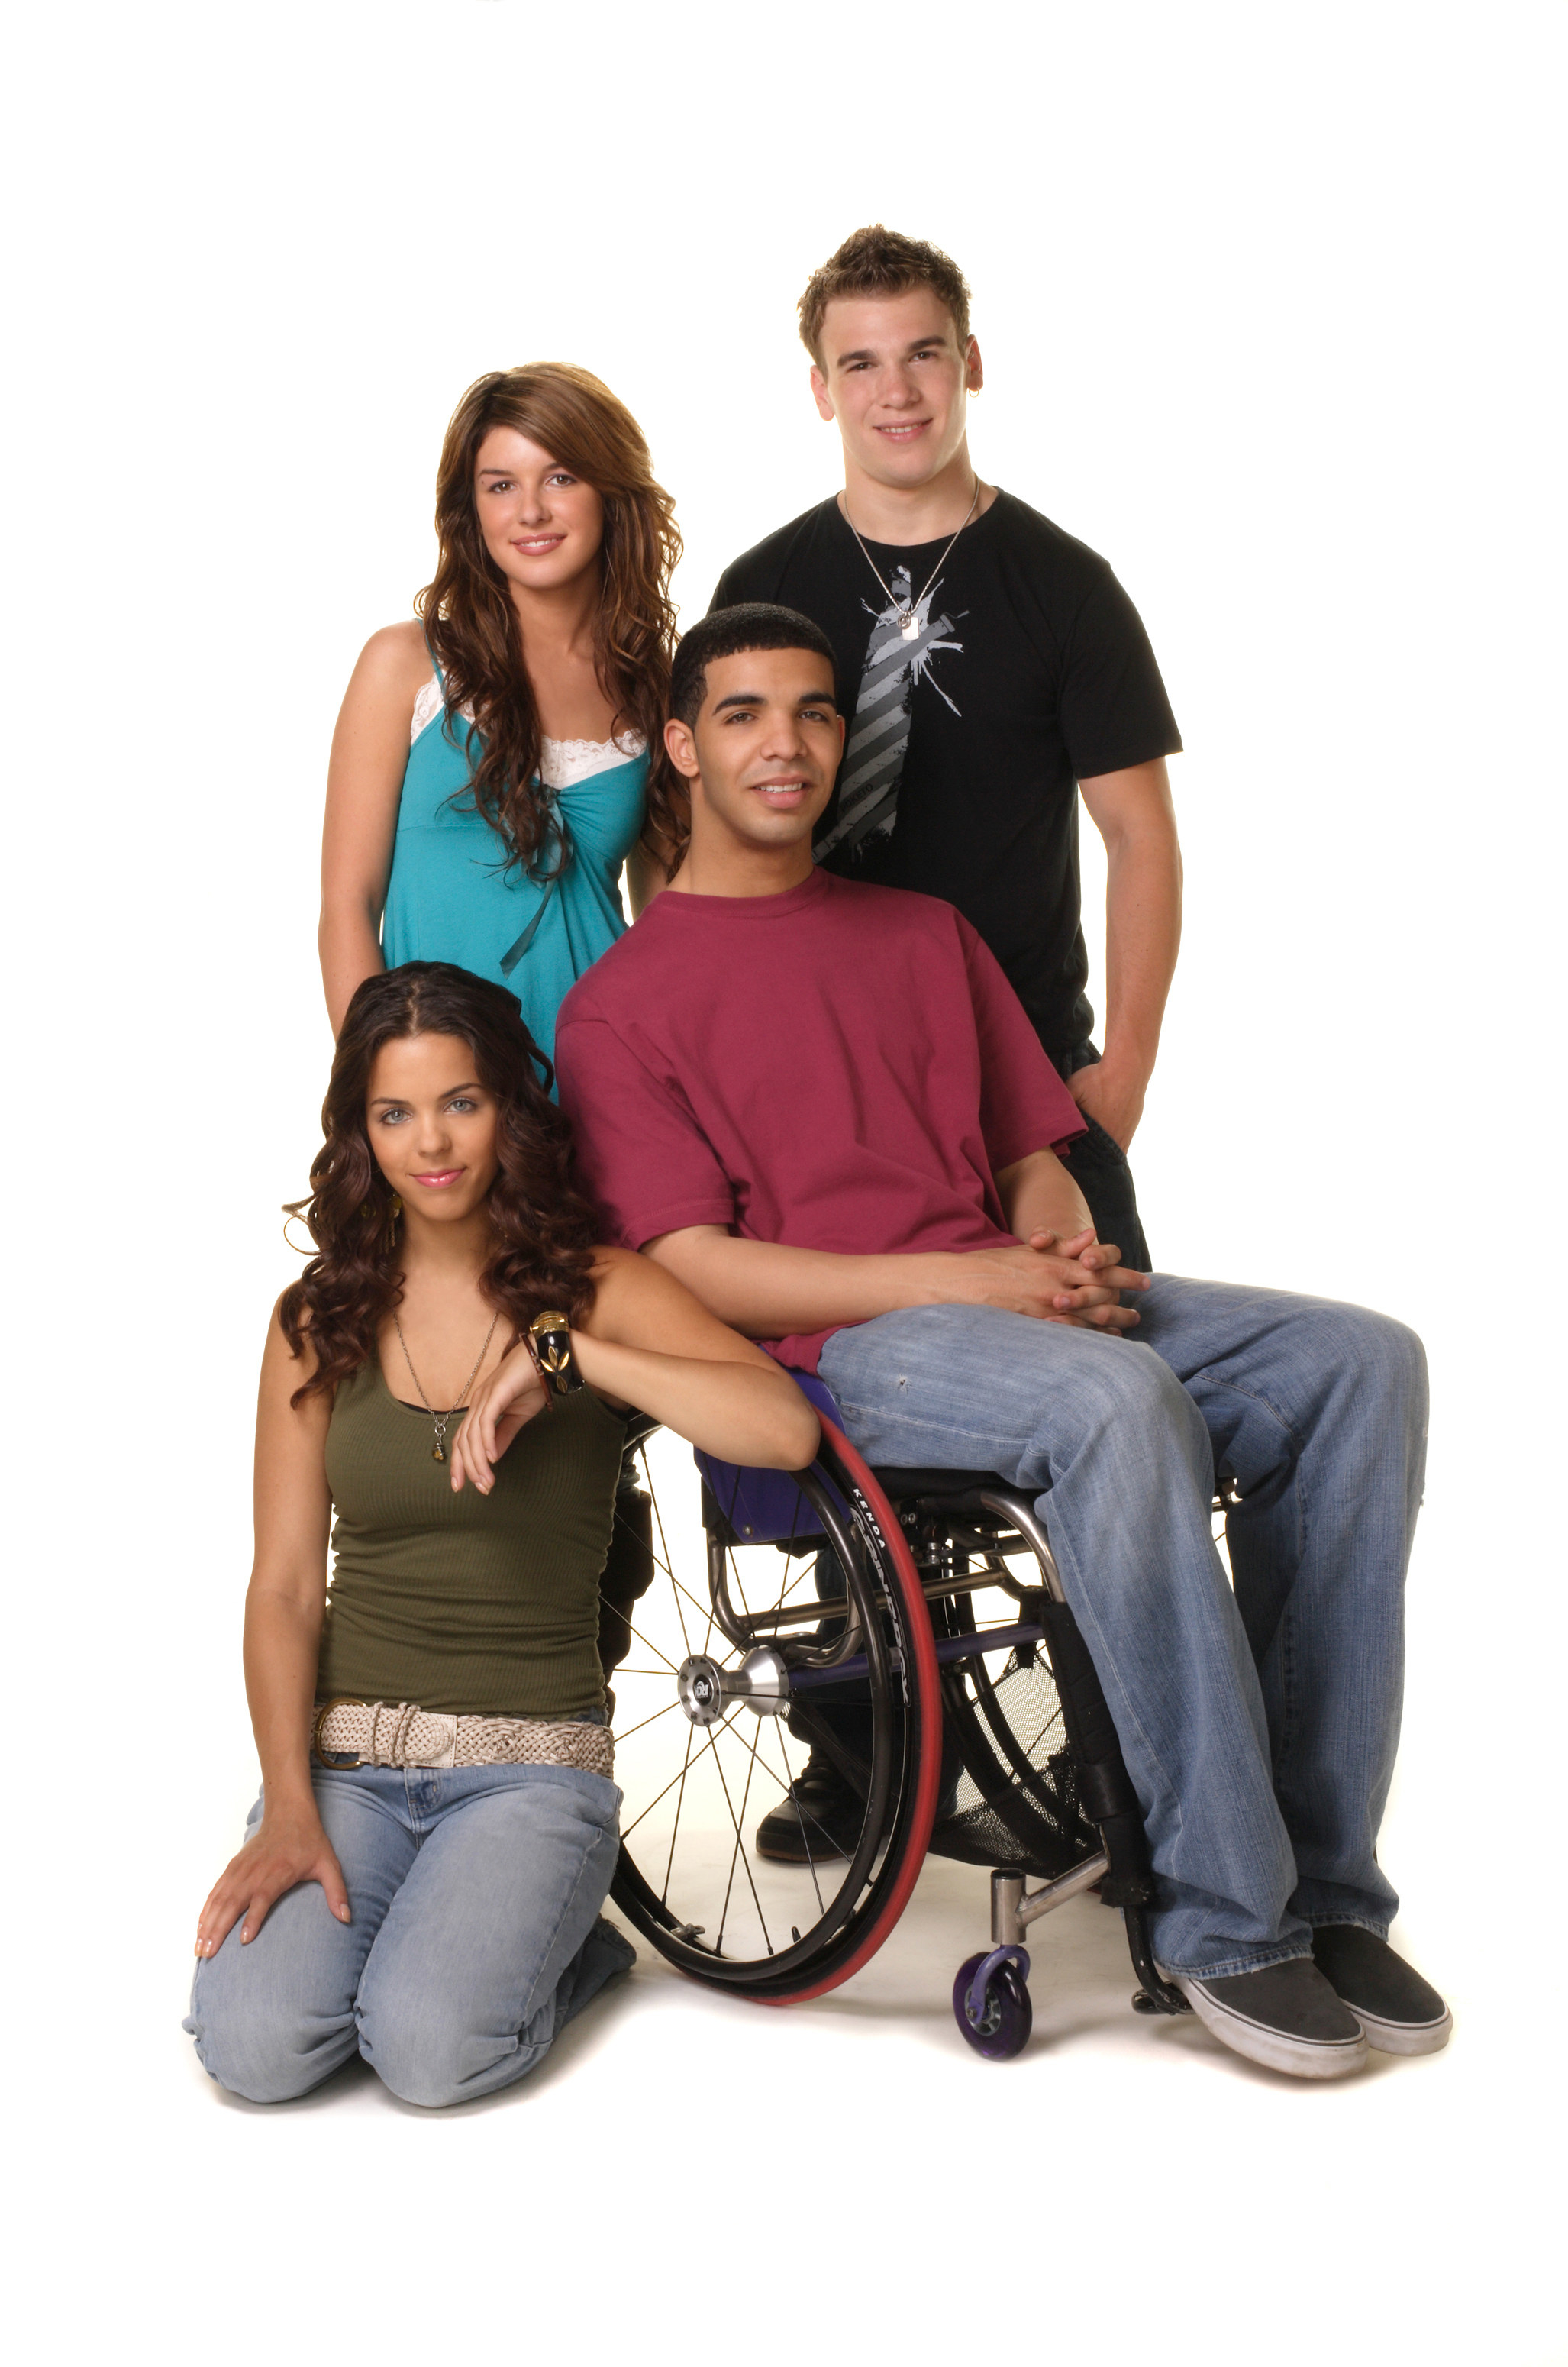 The cast of degrassi featuring Drake